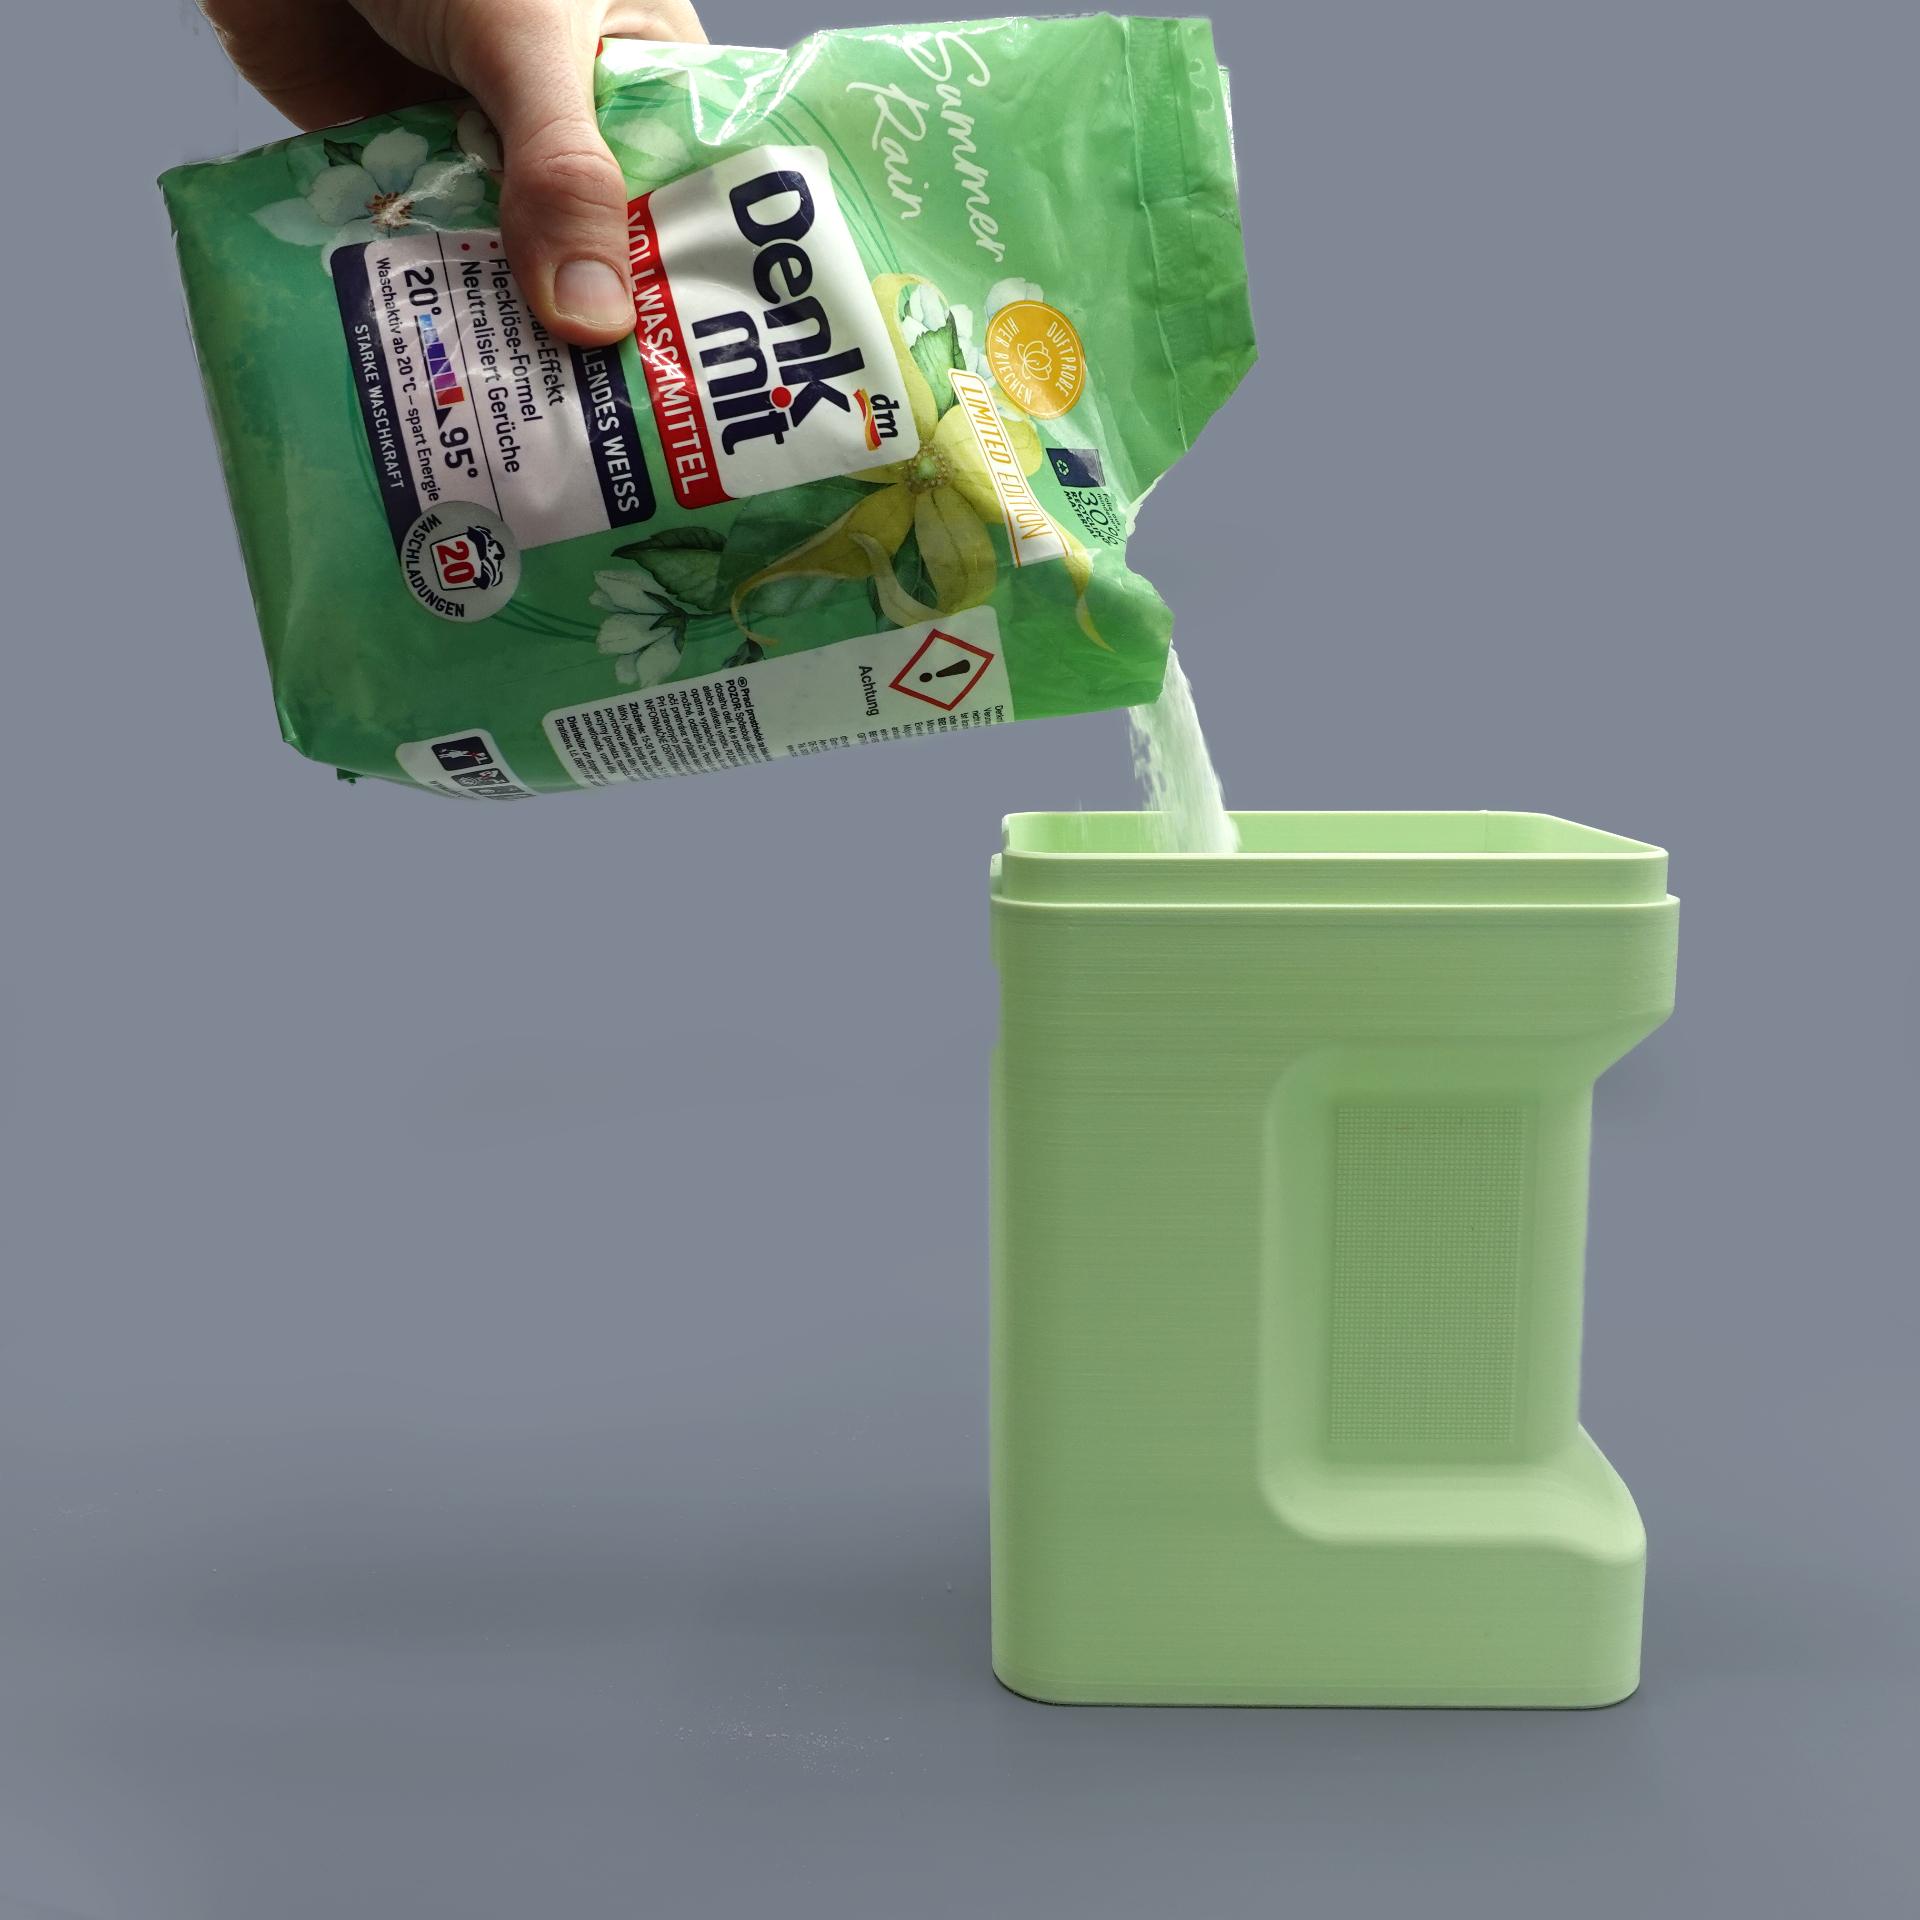 Laundry detergent container 3d model